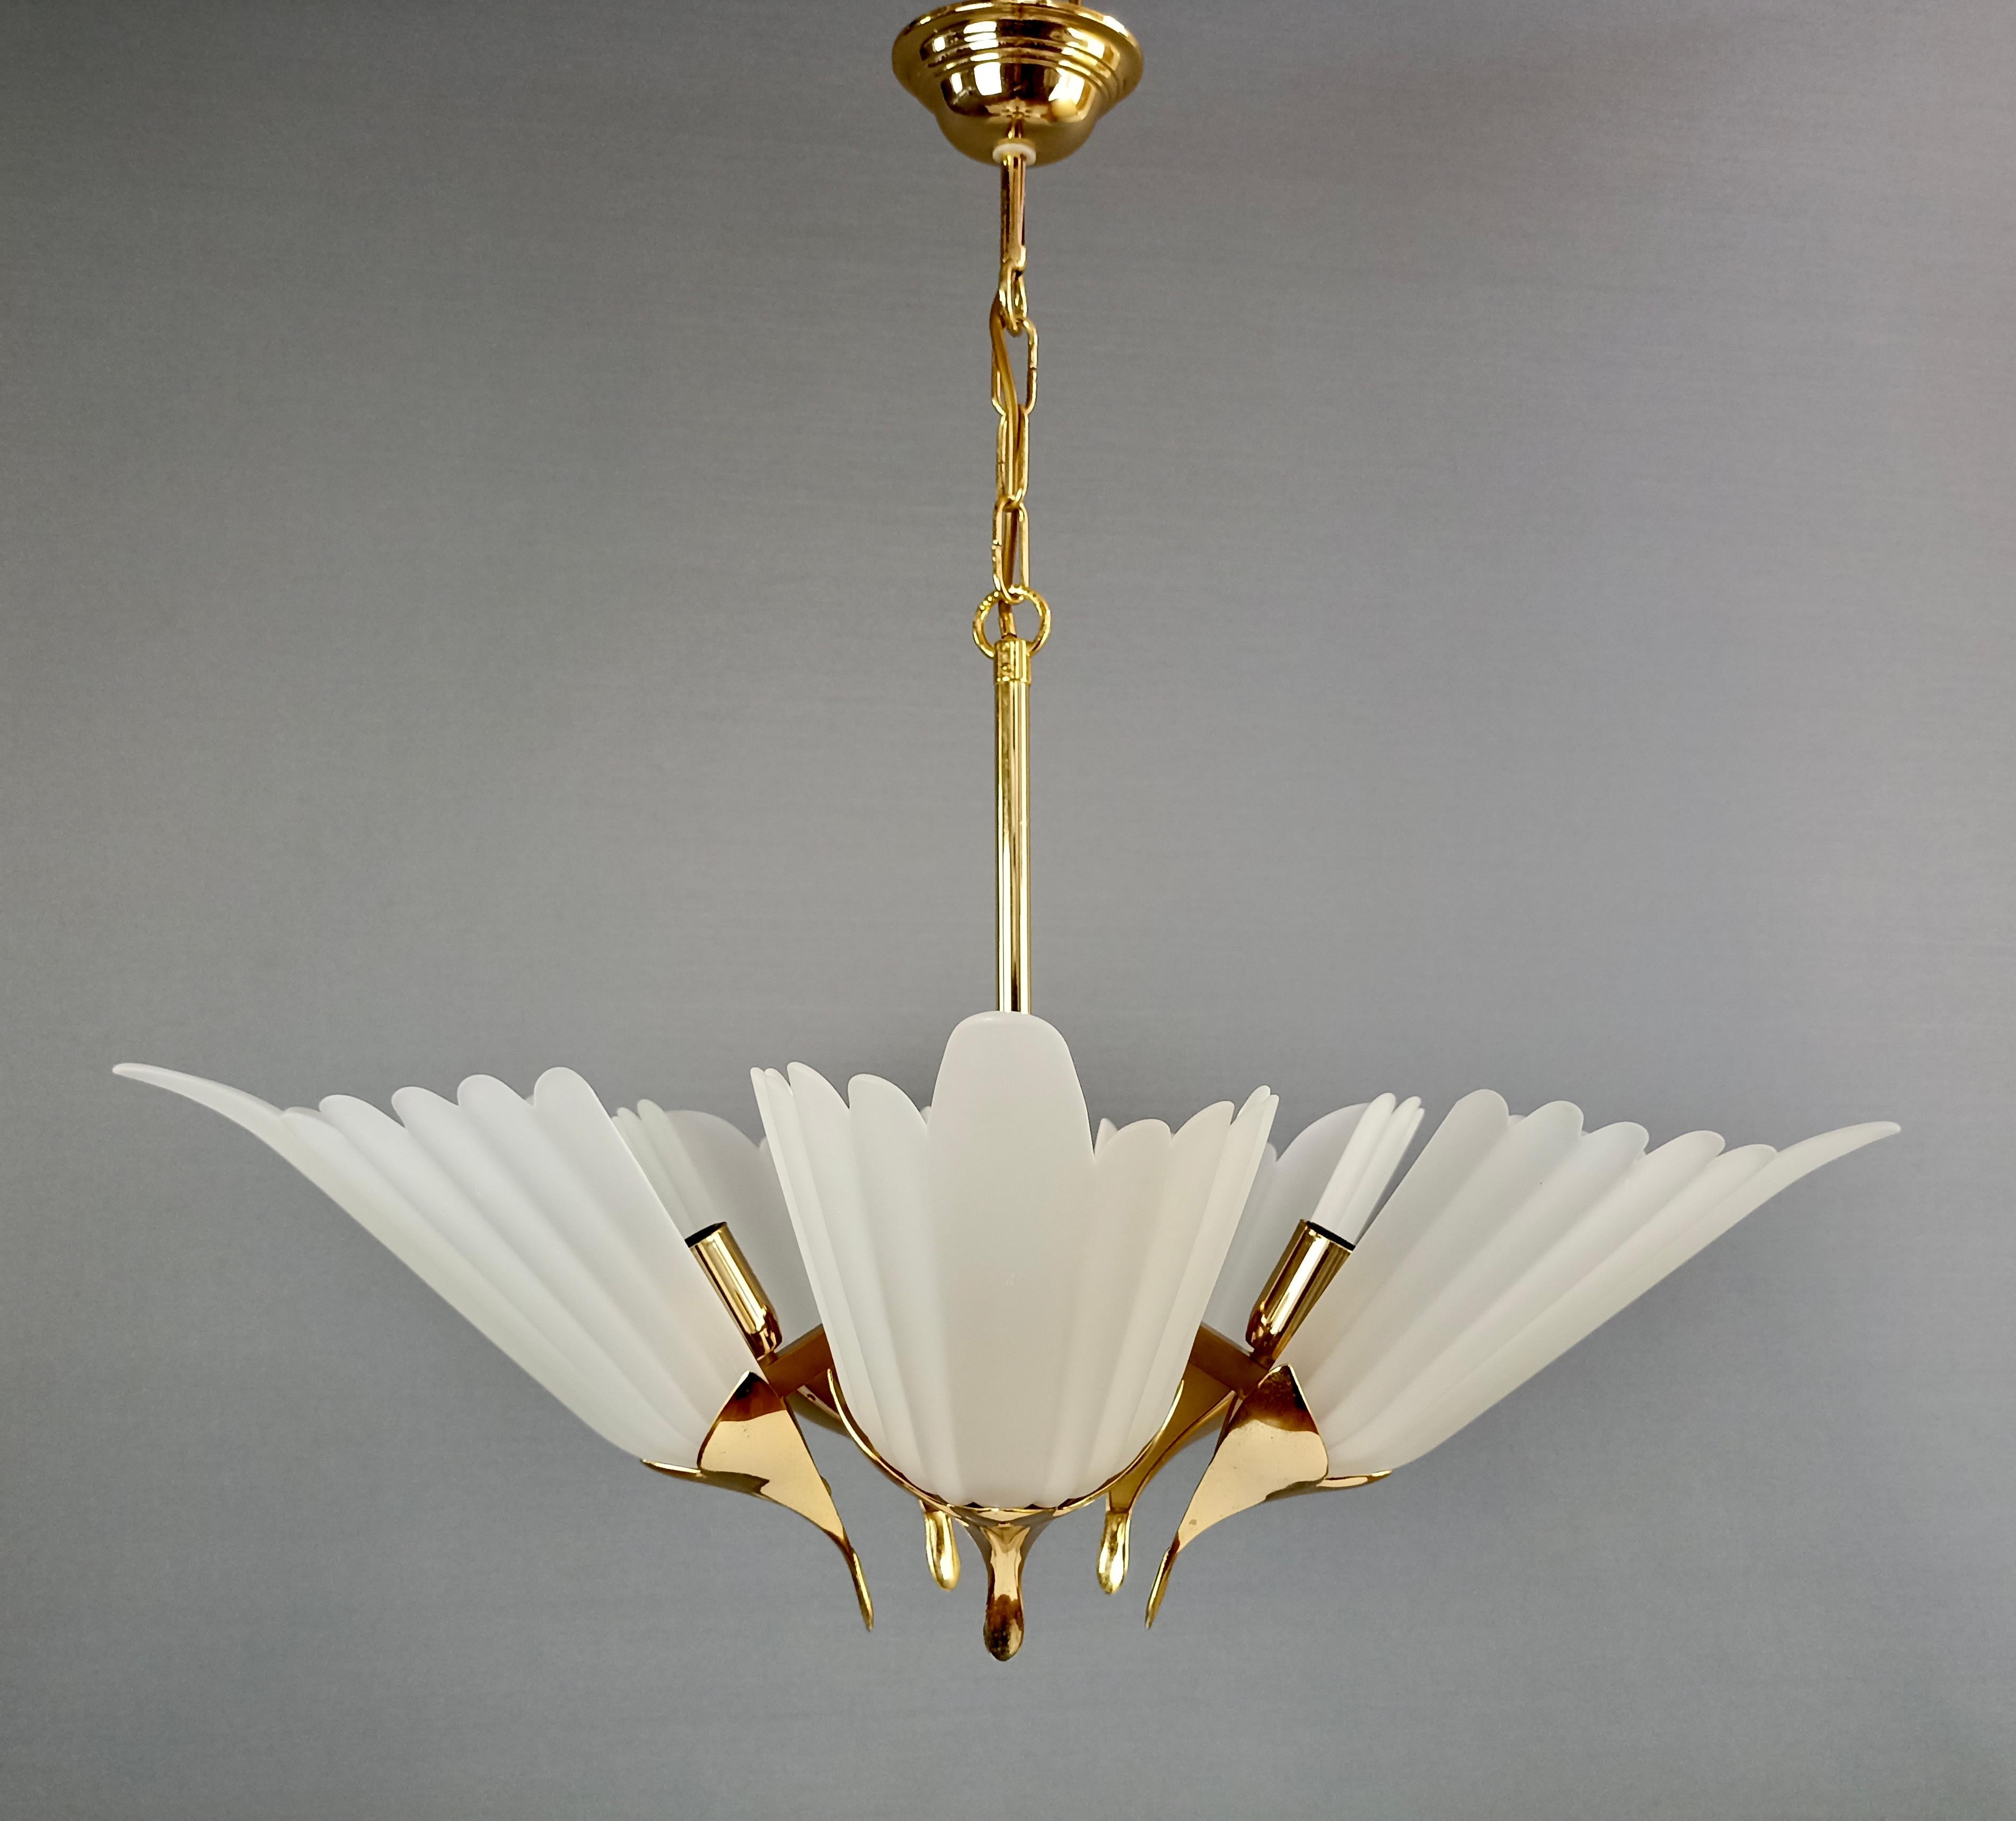 A beautiful and rare F.Fabbian marked five-light chandelier. Italy, 1980s.
The structure is made of gilded brass and metal, the lamp shades are in etched art glass molded in a beautiful petal shape. 
Measurements:
total height with chain: 70 cm/